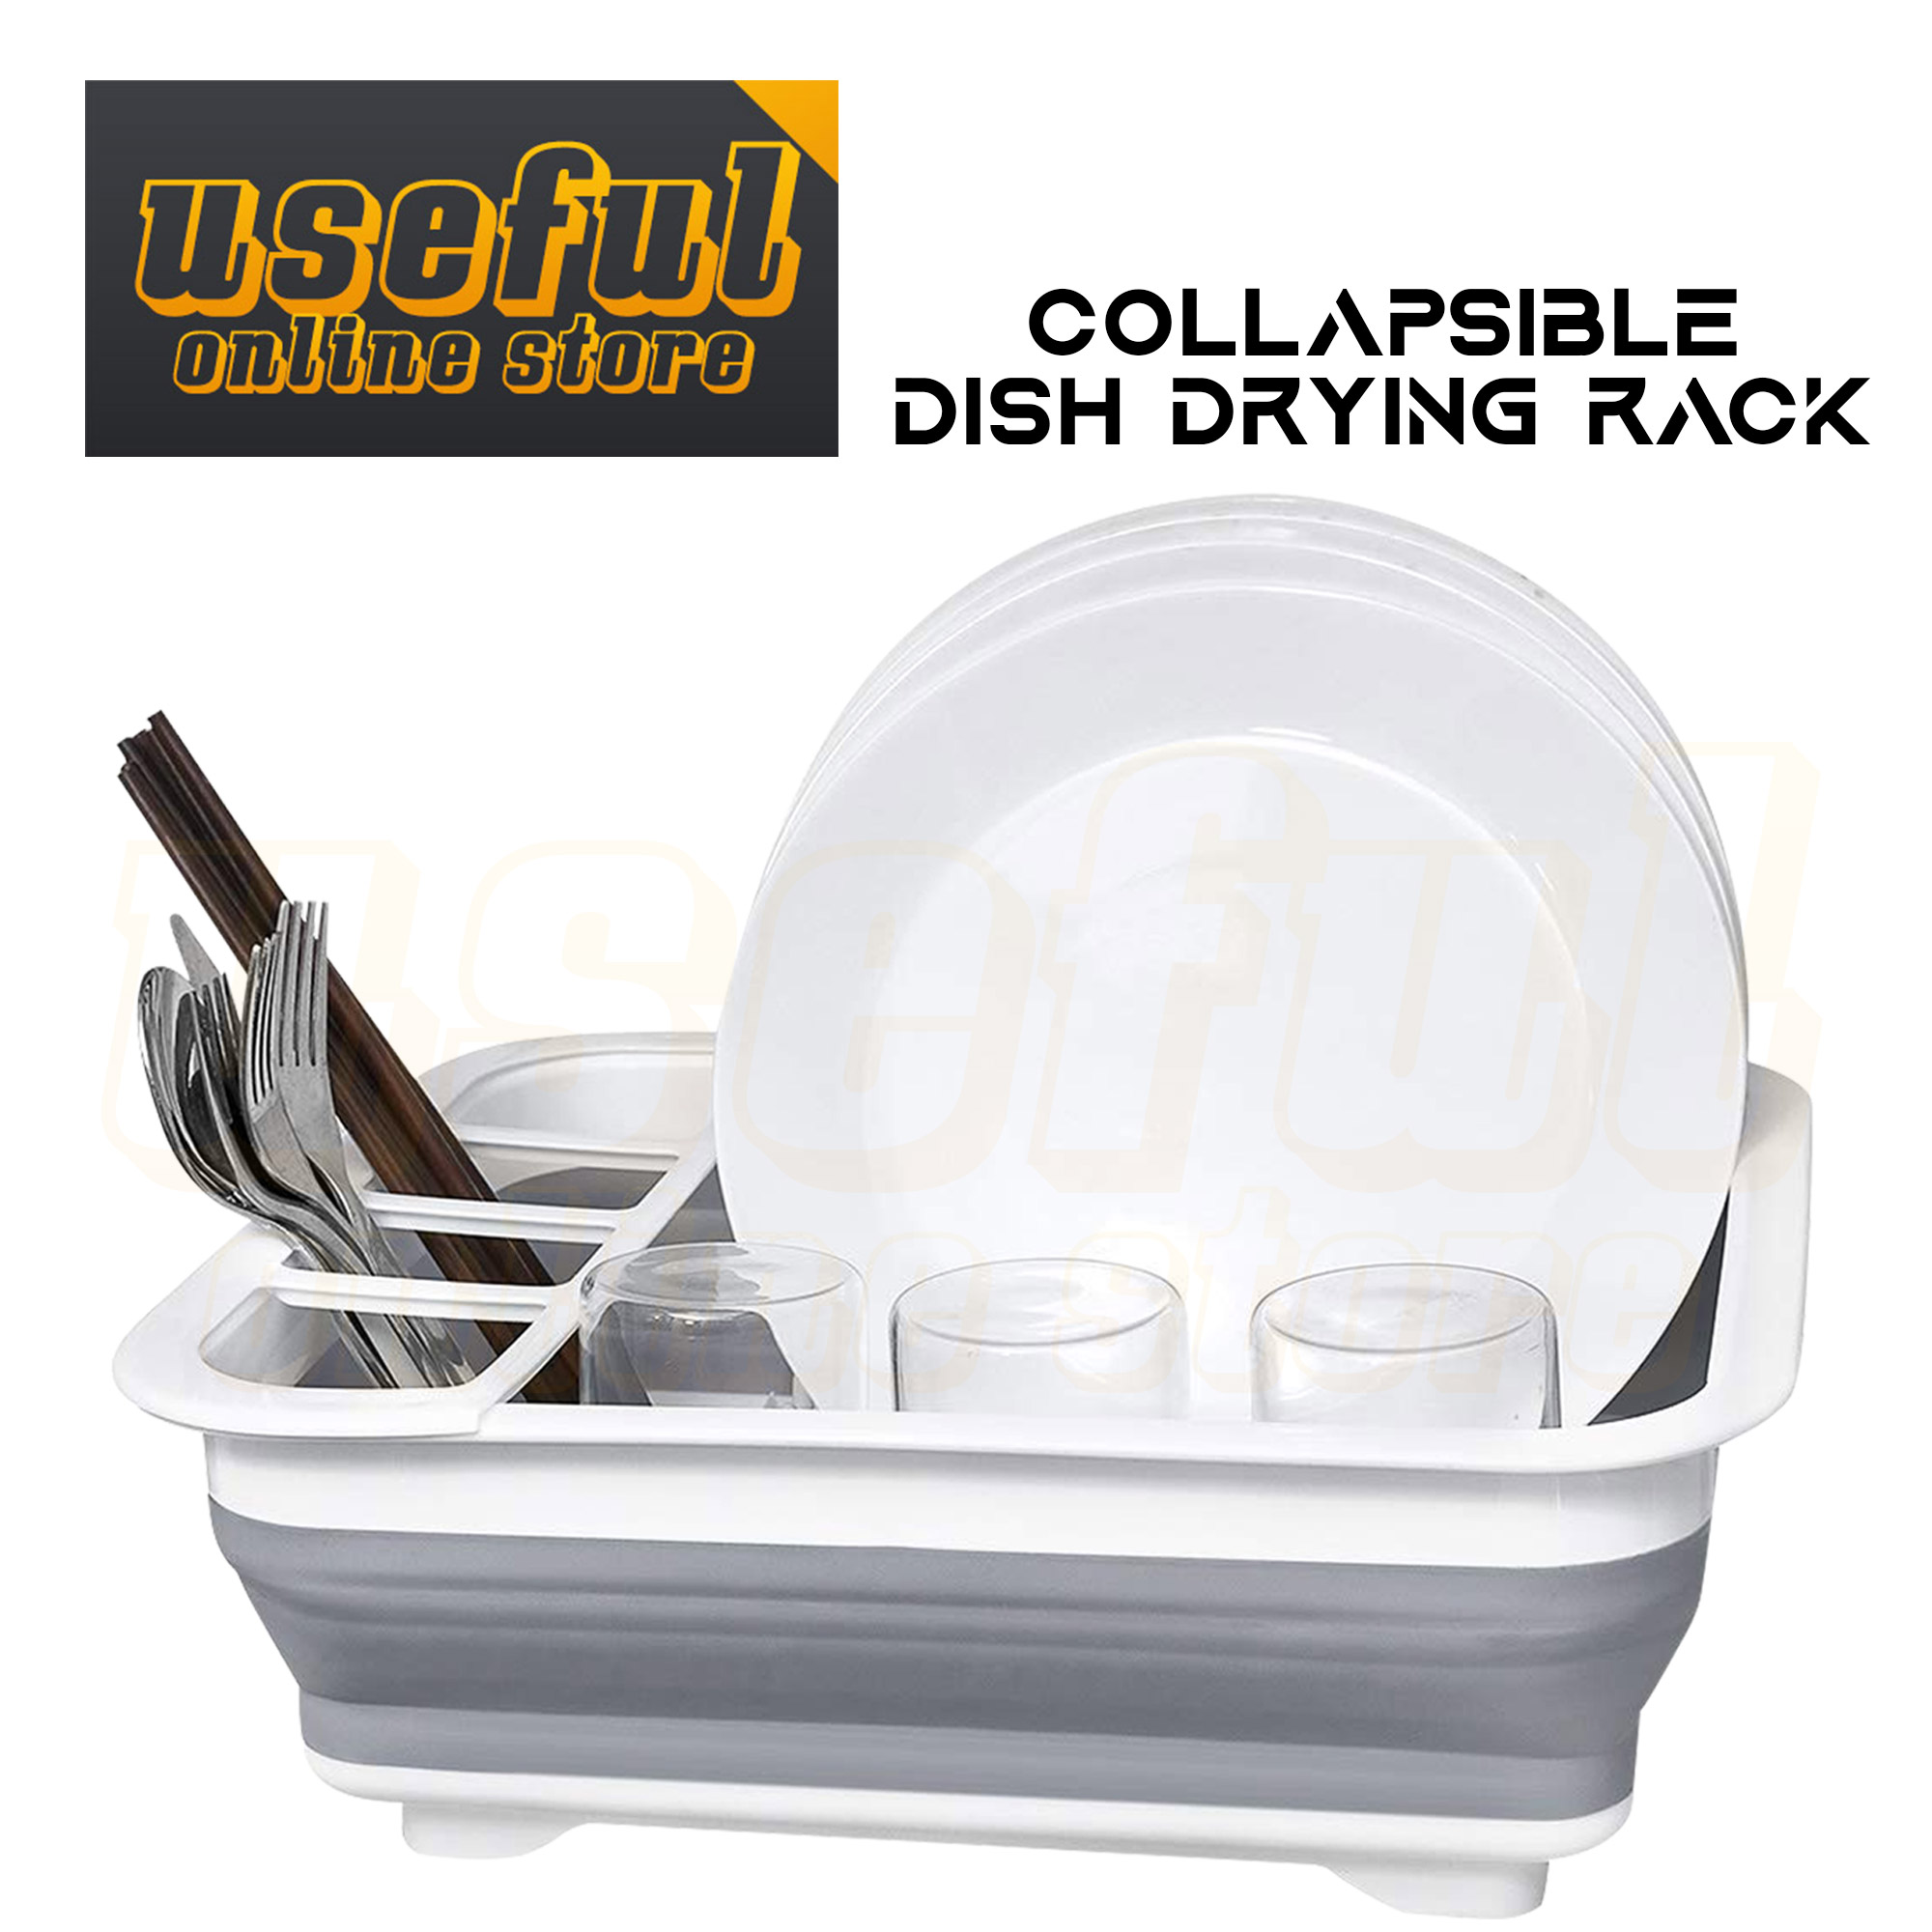 Drain Water Collapsible Dish Drying Rack Popup and Collapse for Easy Storage 